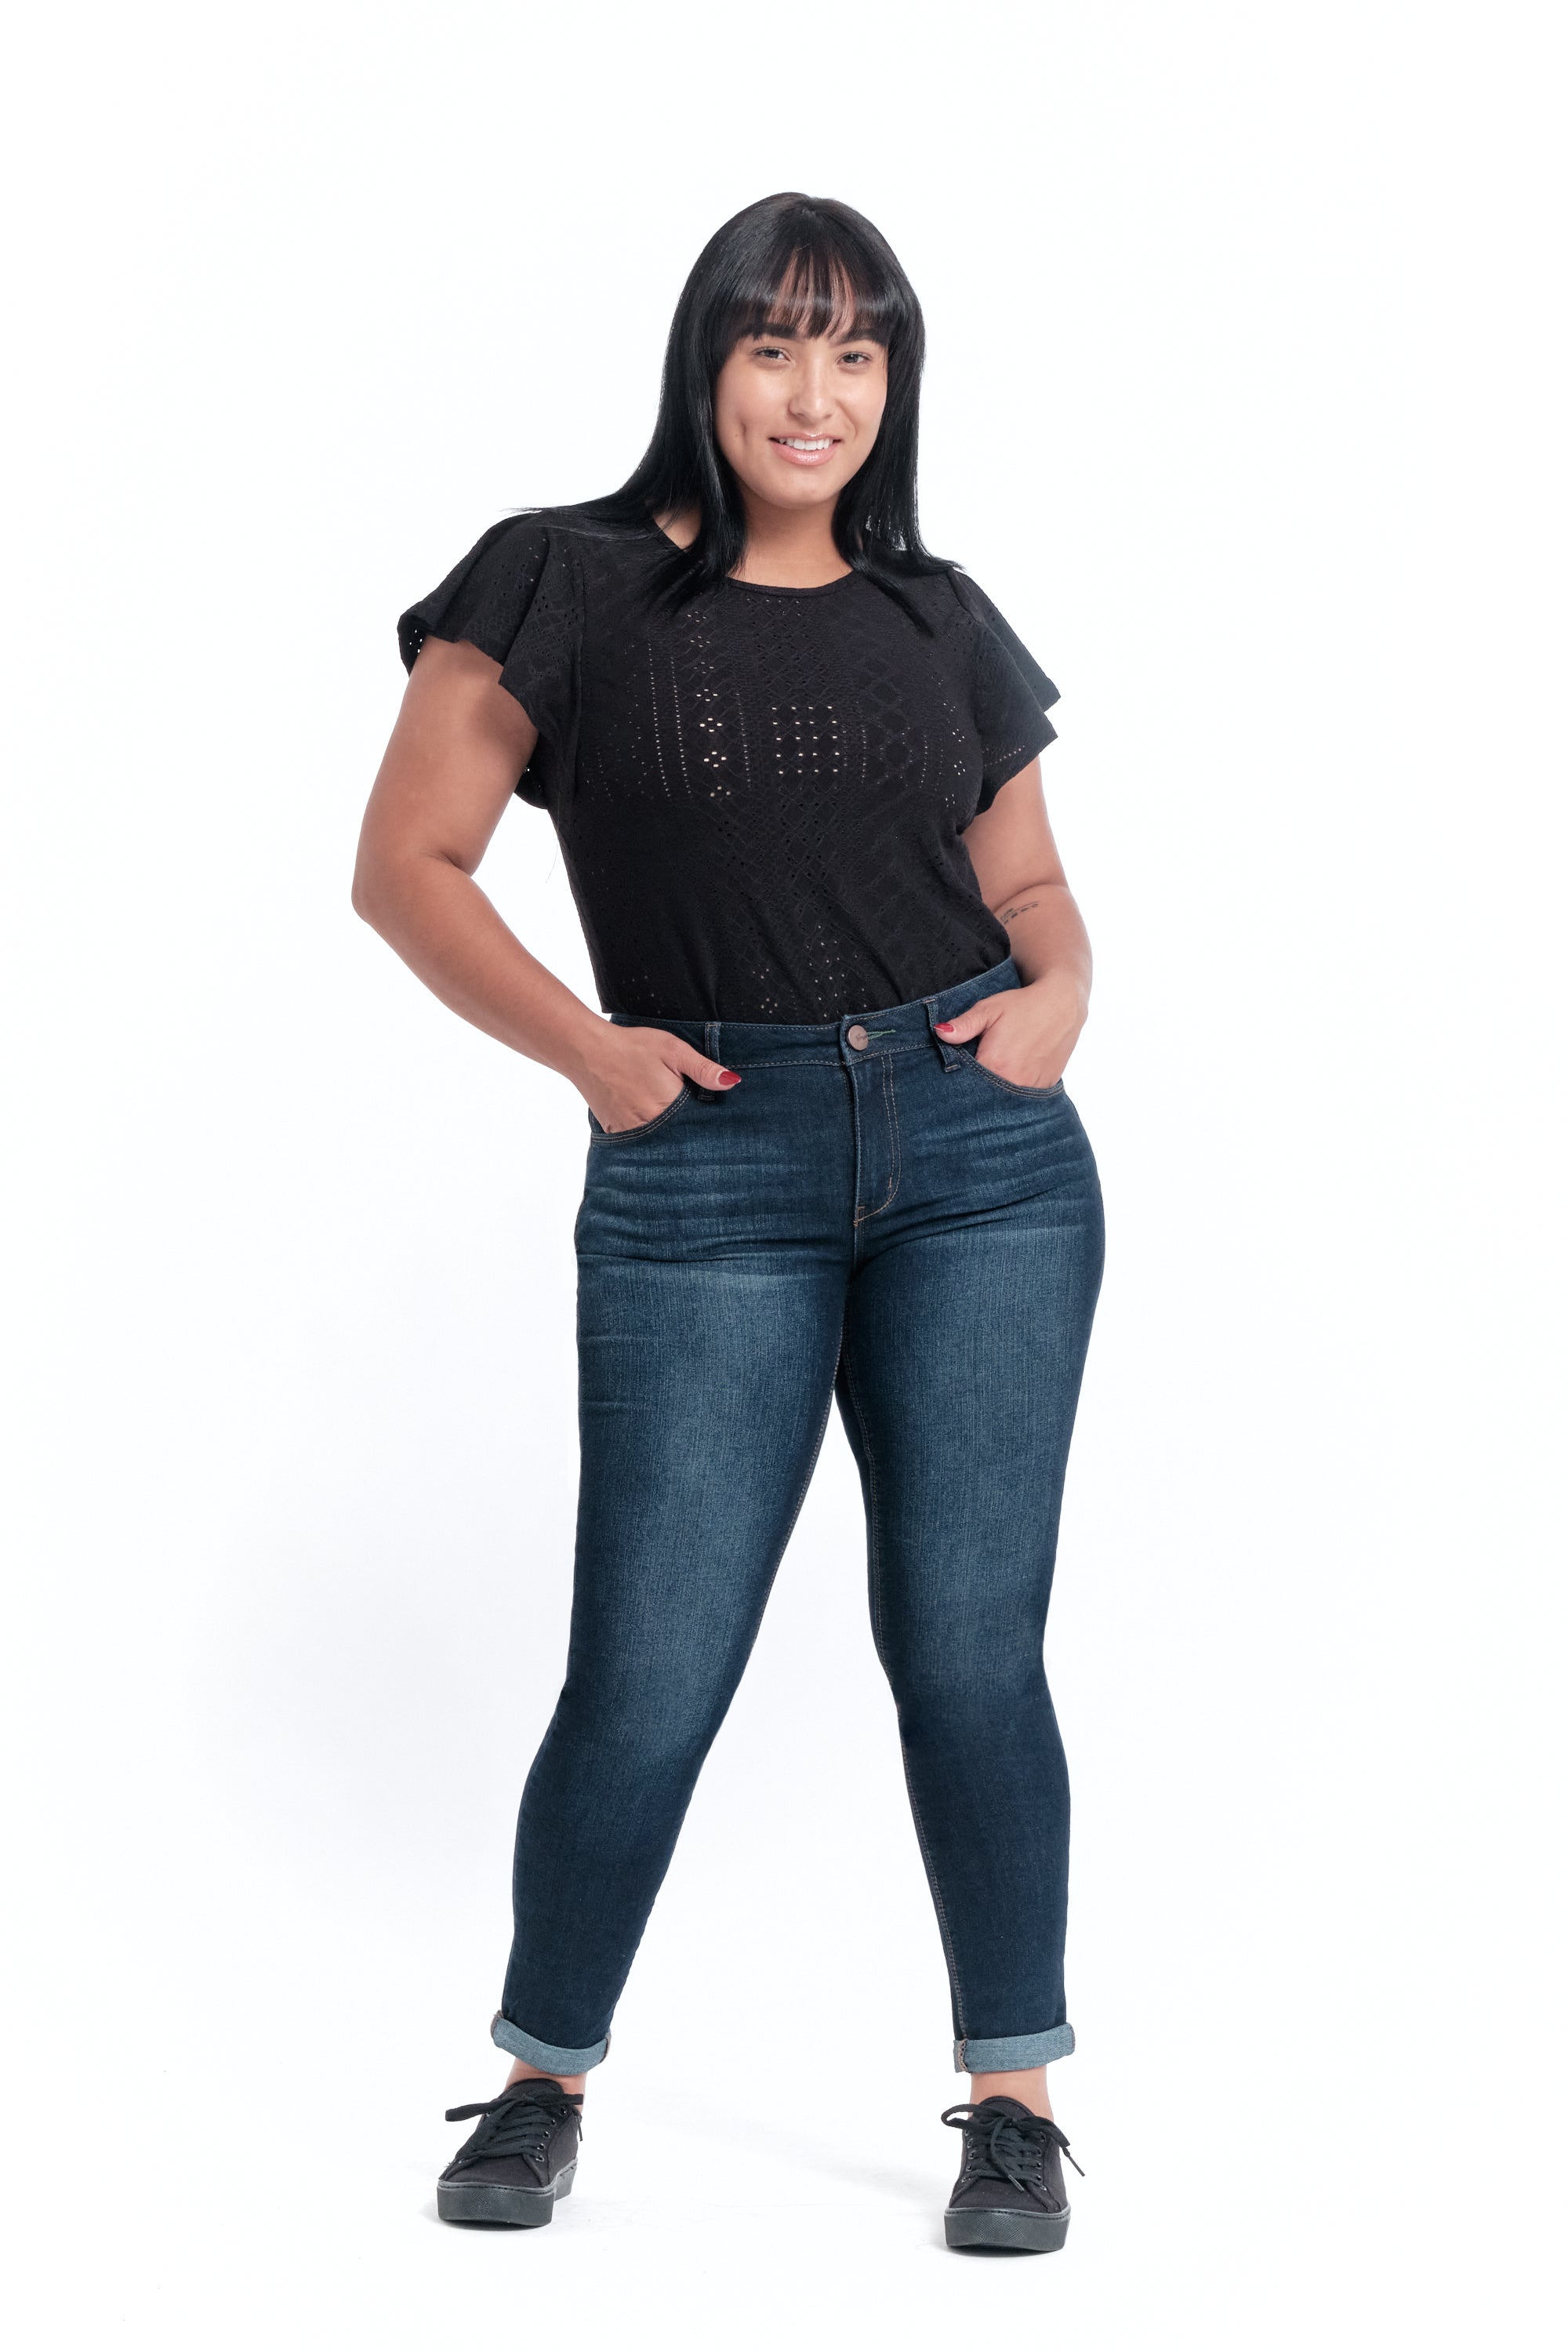 newjeans pics on Twitter  New jeans style, Straight jeans outfit, Curvy  women jeans